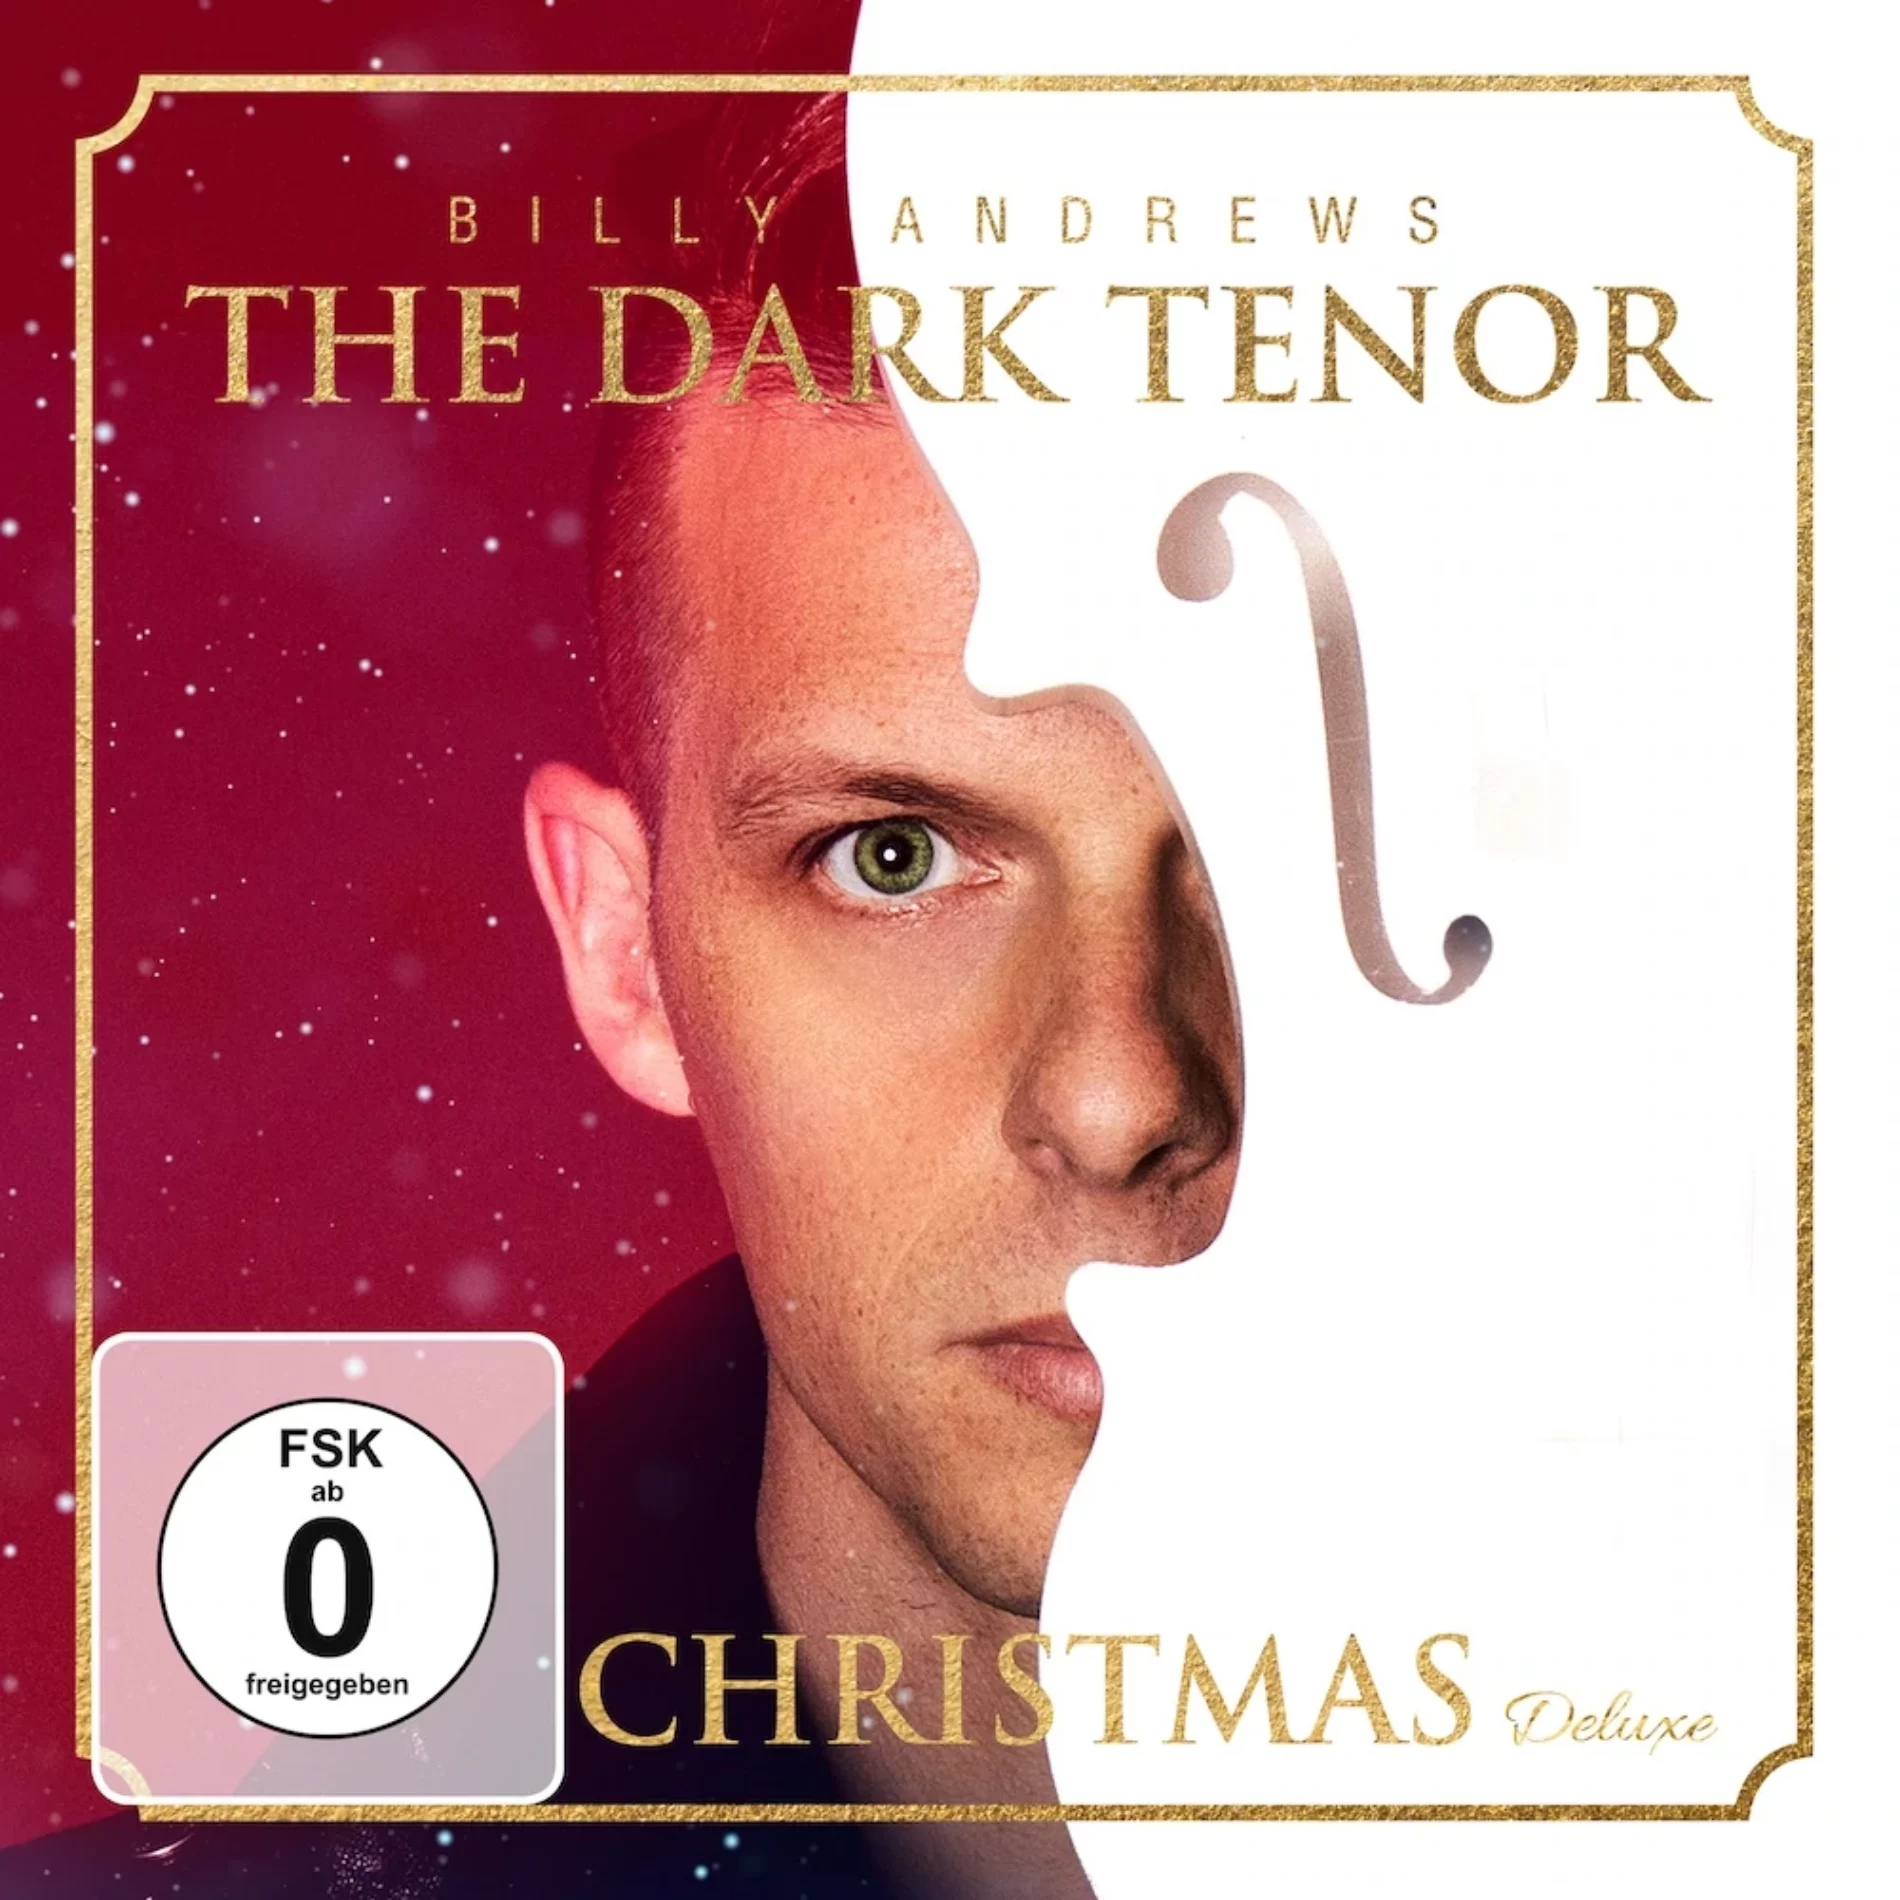 The Dark Tenor – Christmas (Deluxe Version) Review